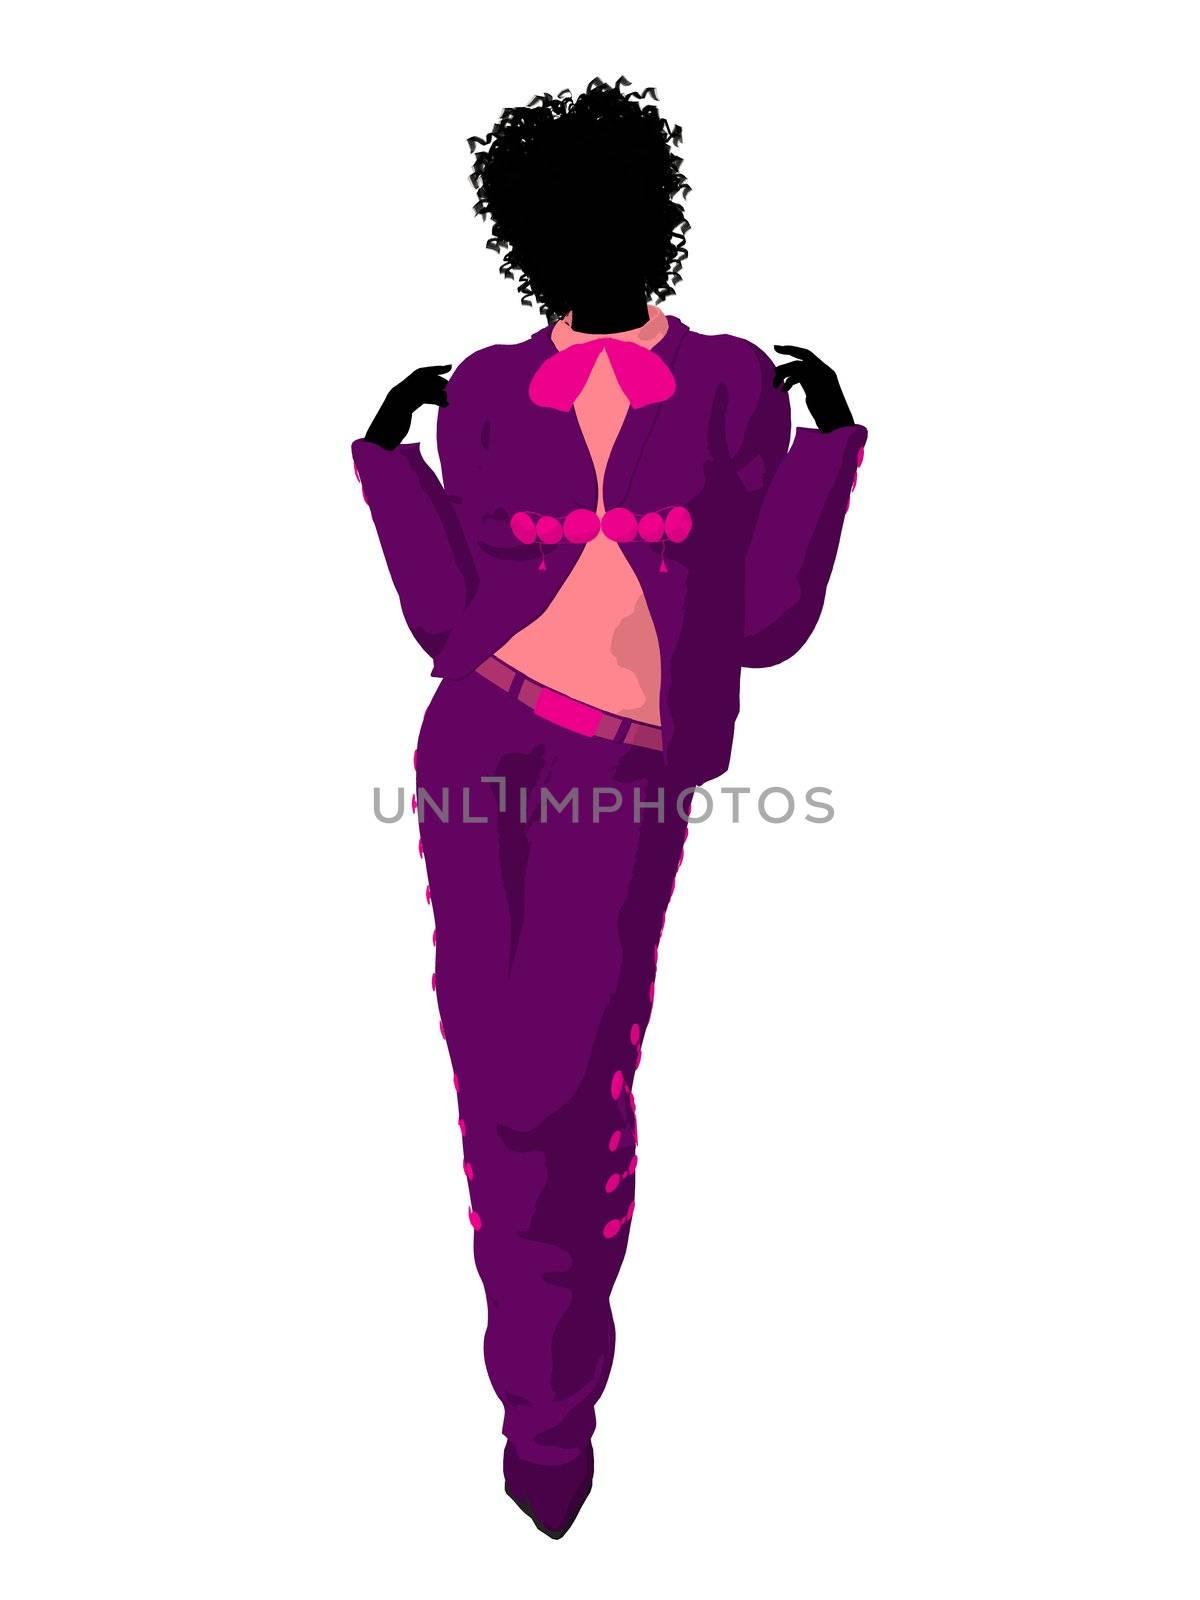 African american female mariachi illustration silhouette illustration on a white background